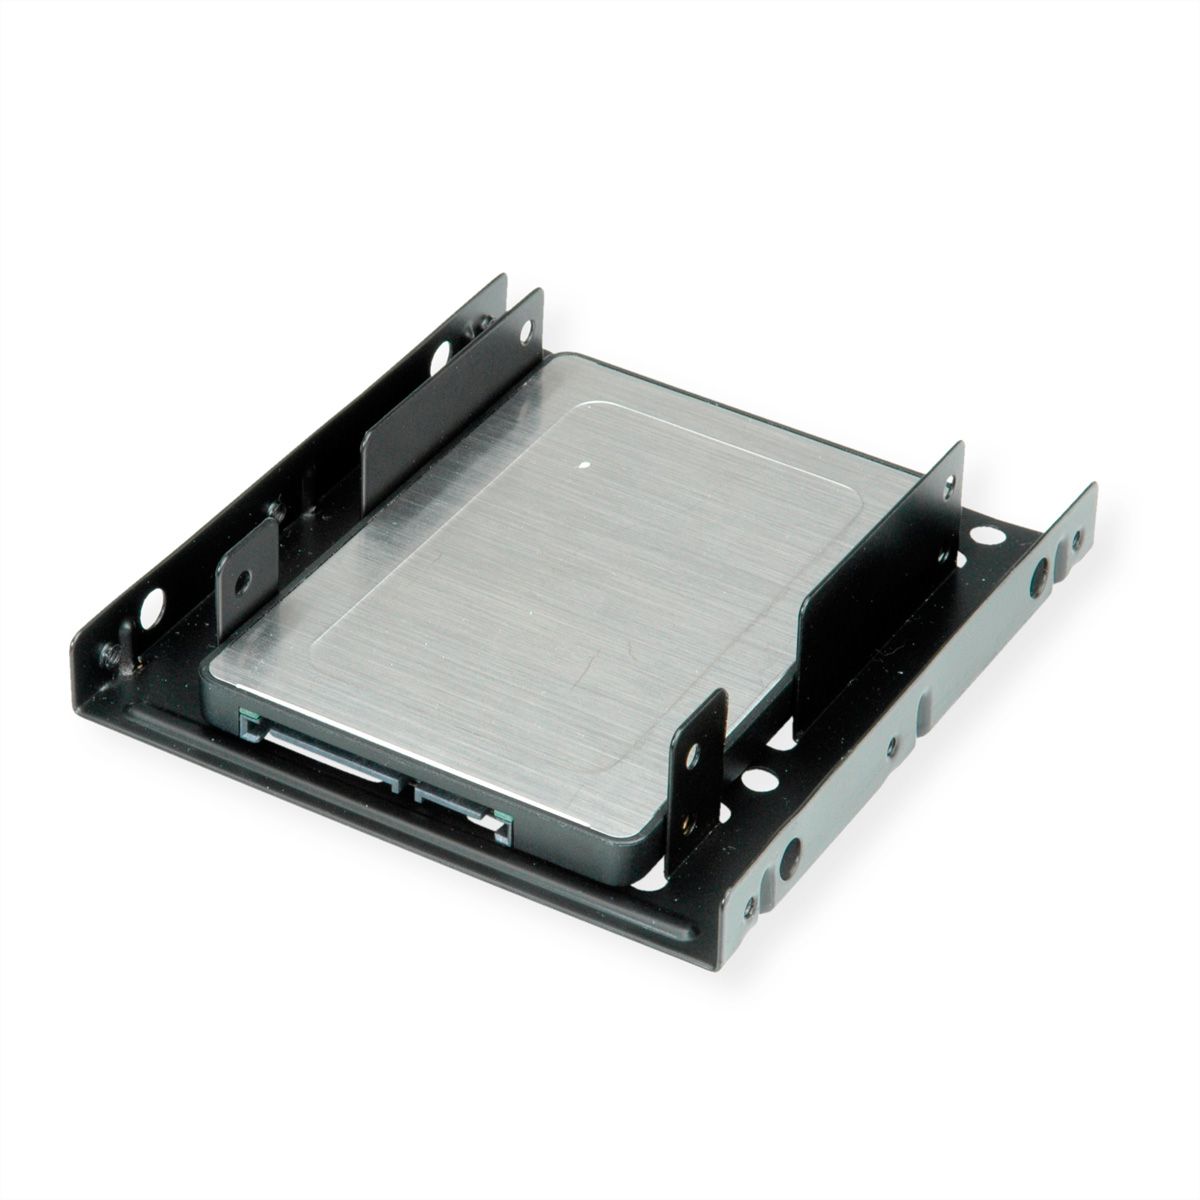 2.5 Inch to 3.5 Inch HDD/SSD Mounting Bracket Fitting Kit . 